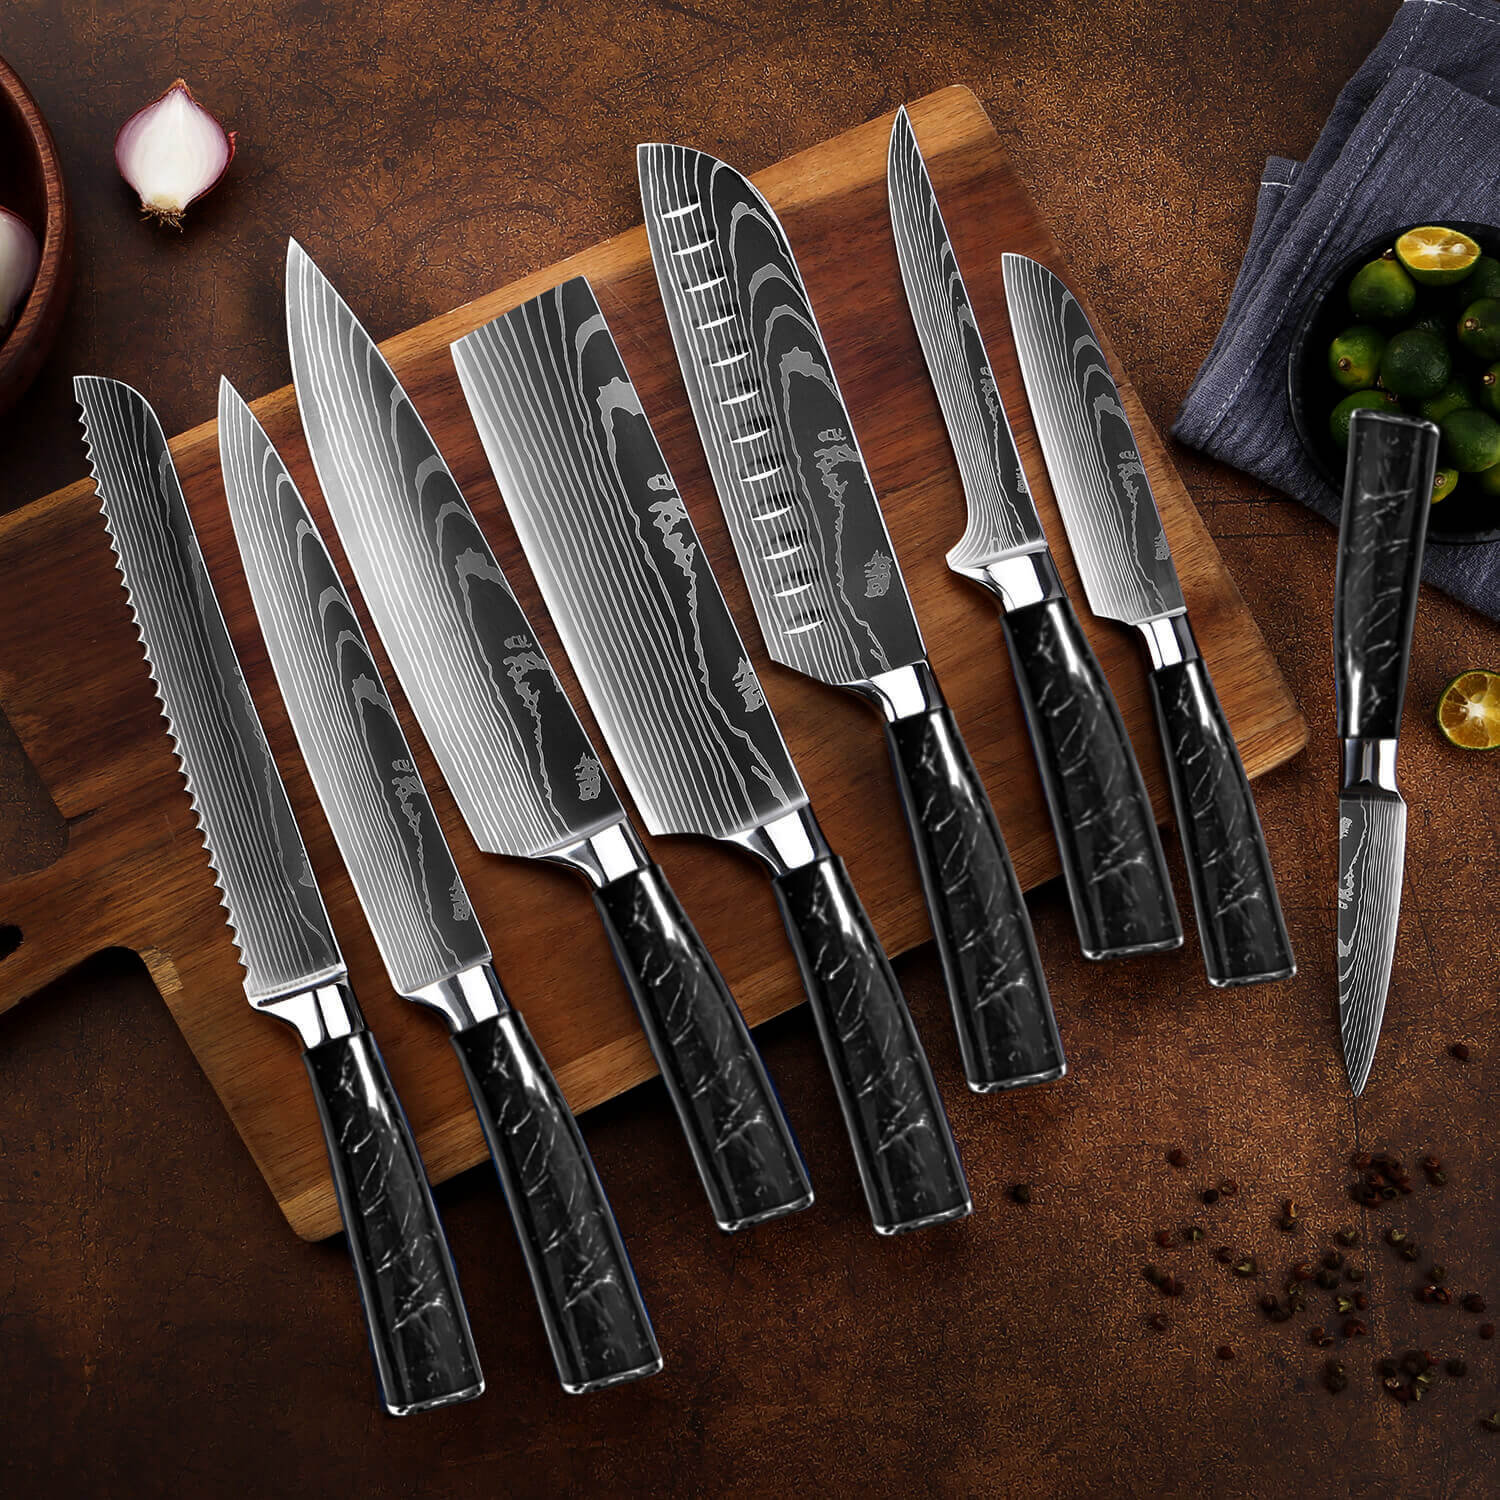 Pro Series 2.0 3pc Forged Chef Knife Set with Edge Guards